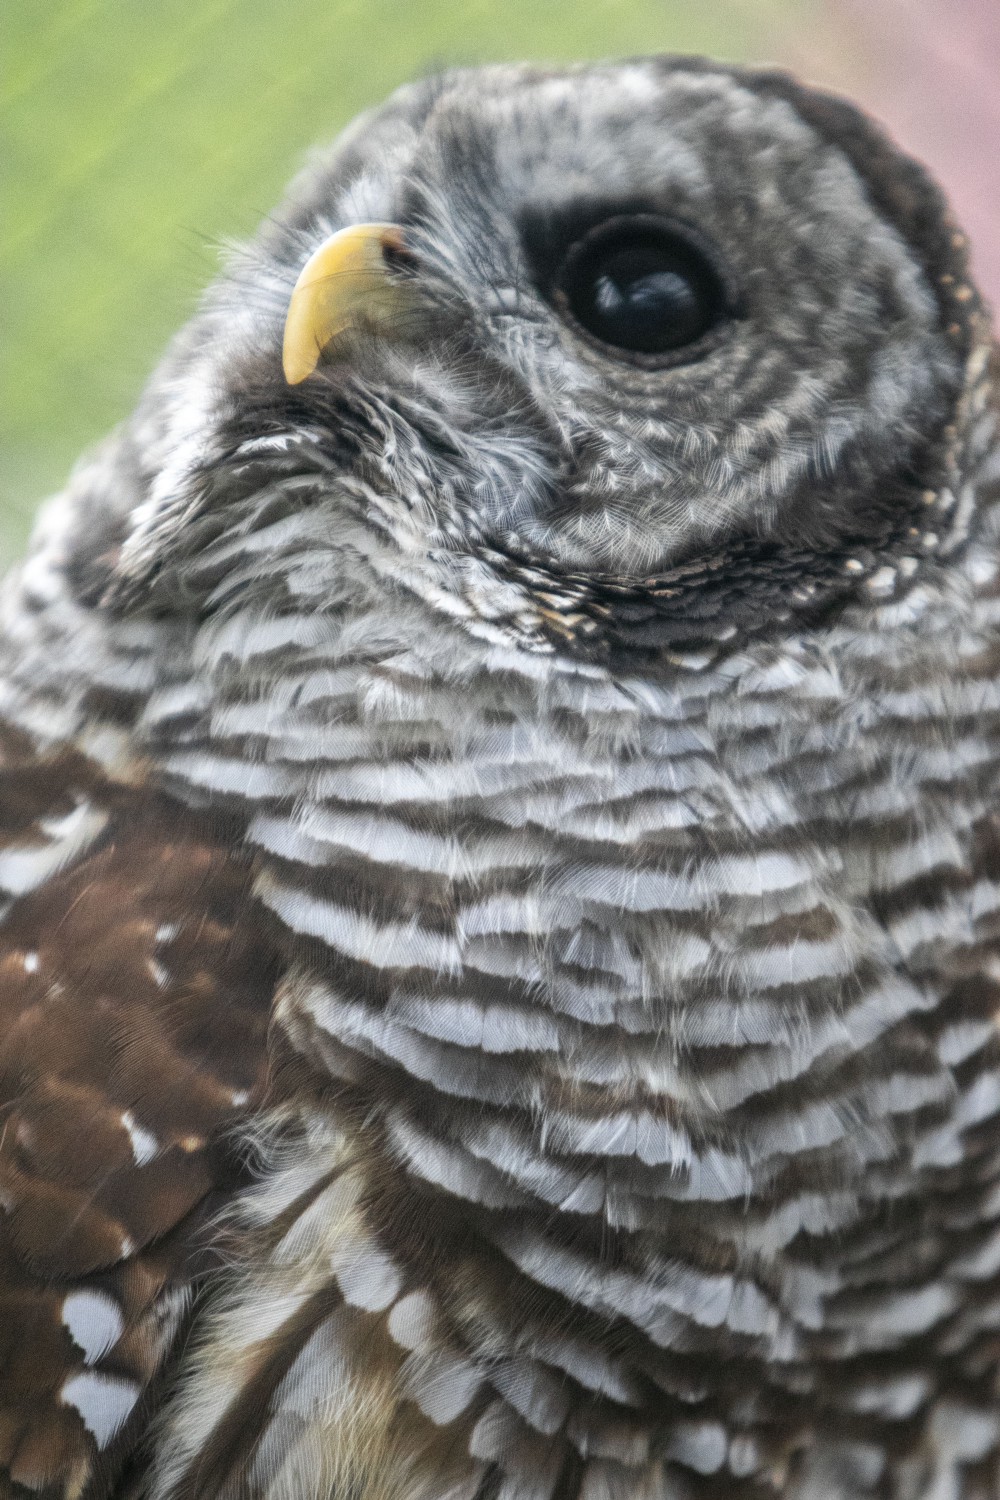 Olive the barred owl